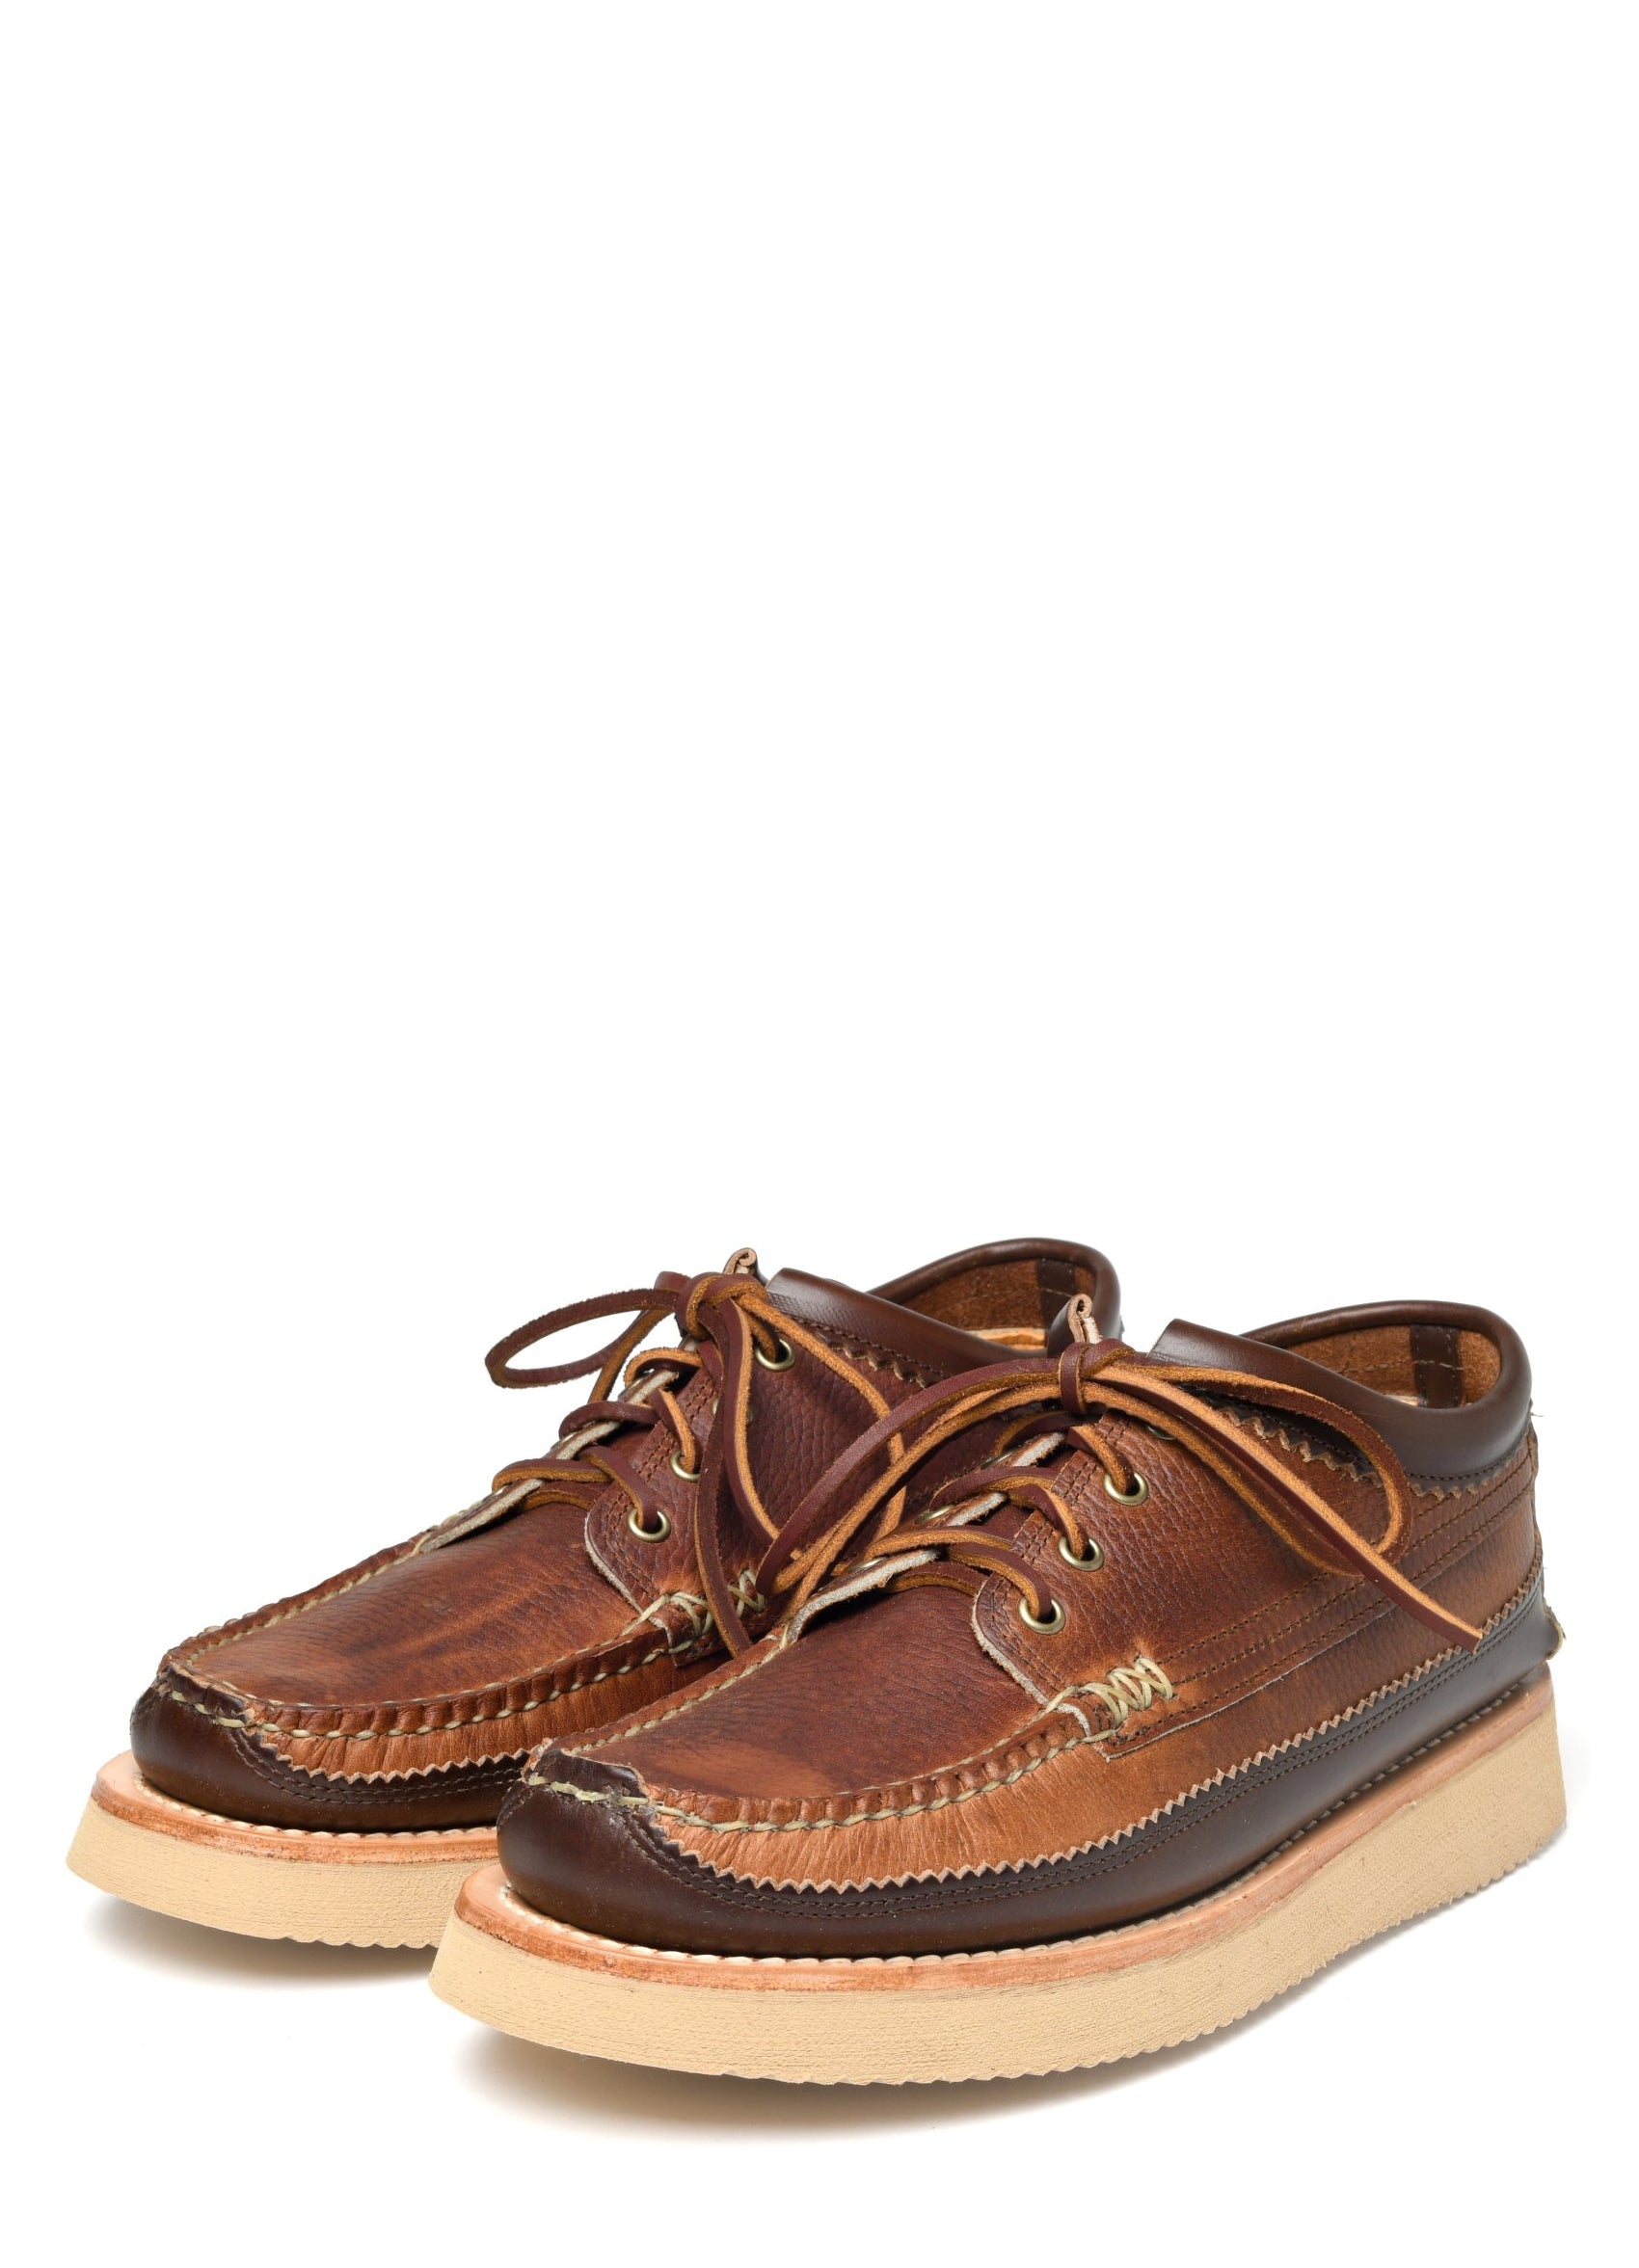 MAINE GUIDE OX | Moccasin Shoe | CP Brown/G Brown